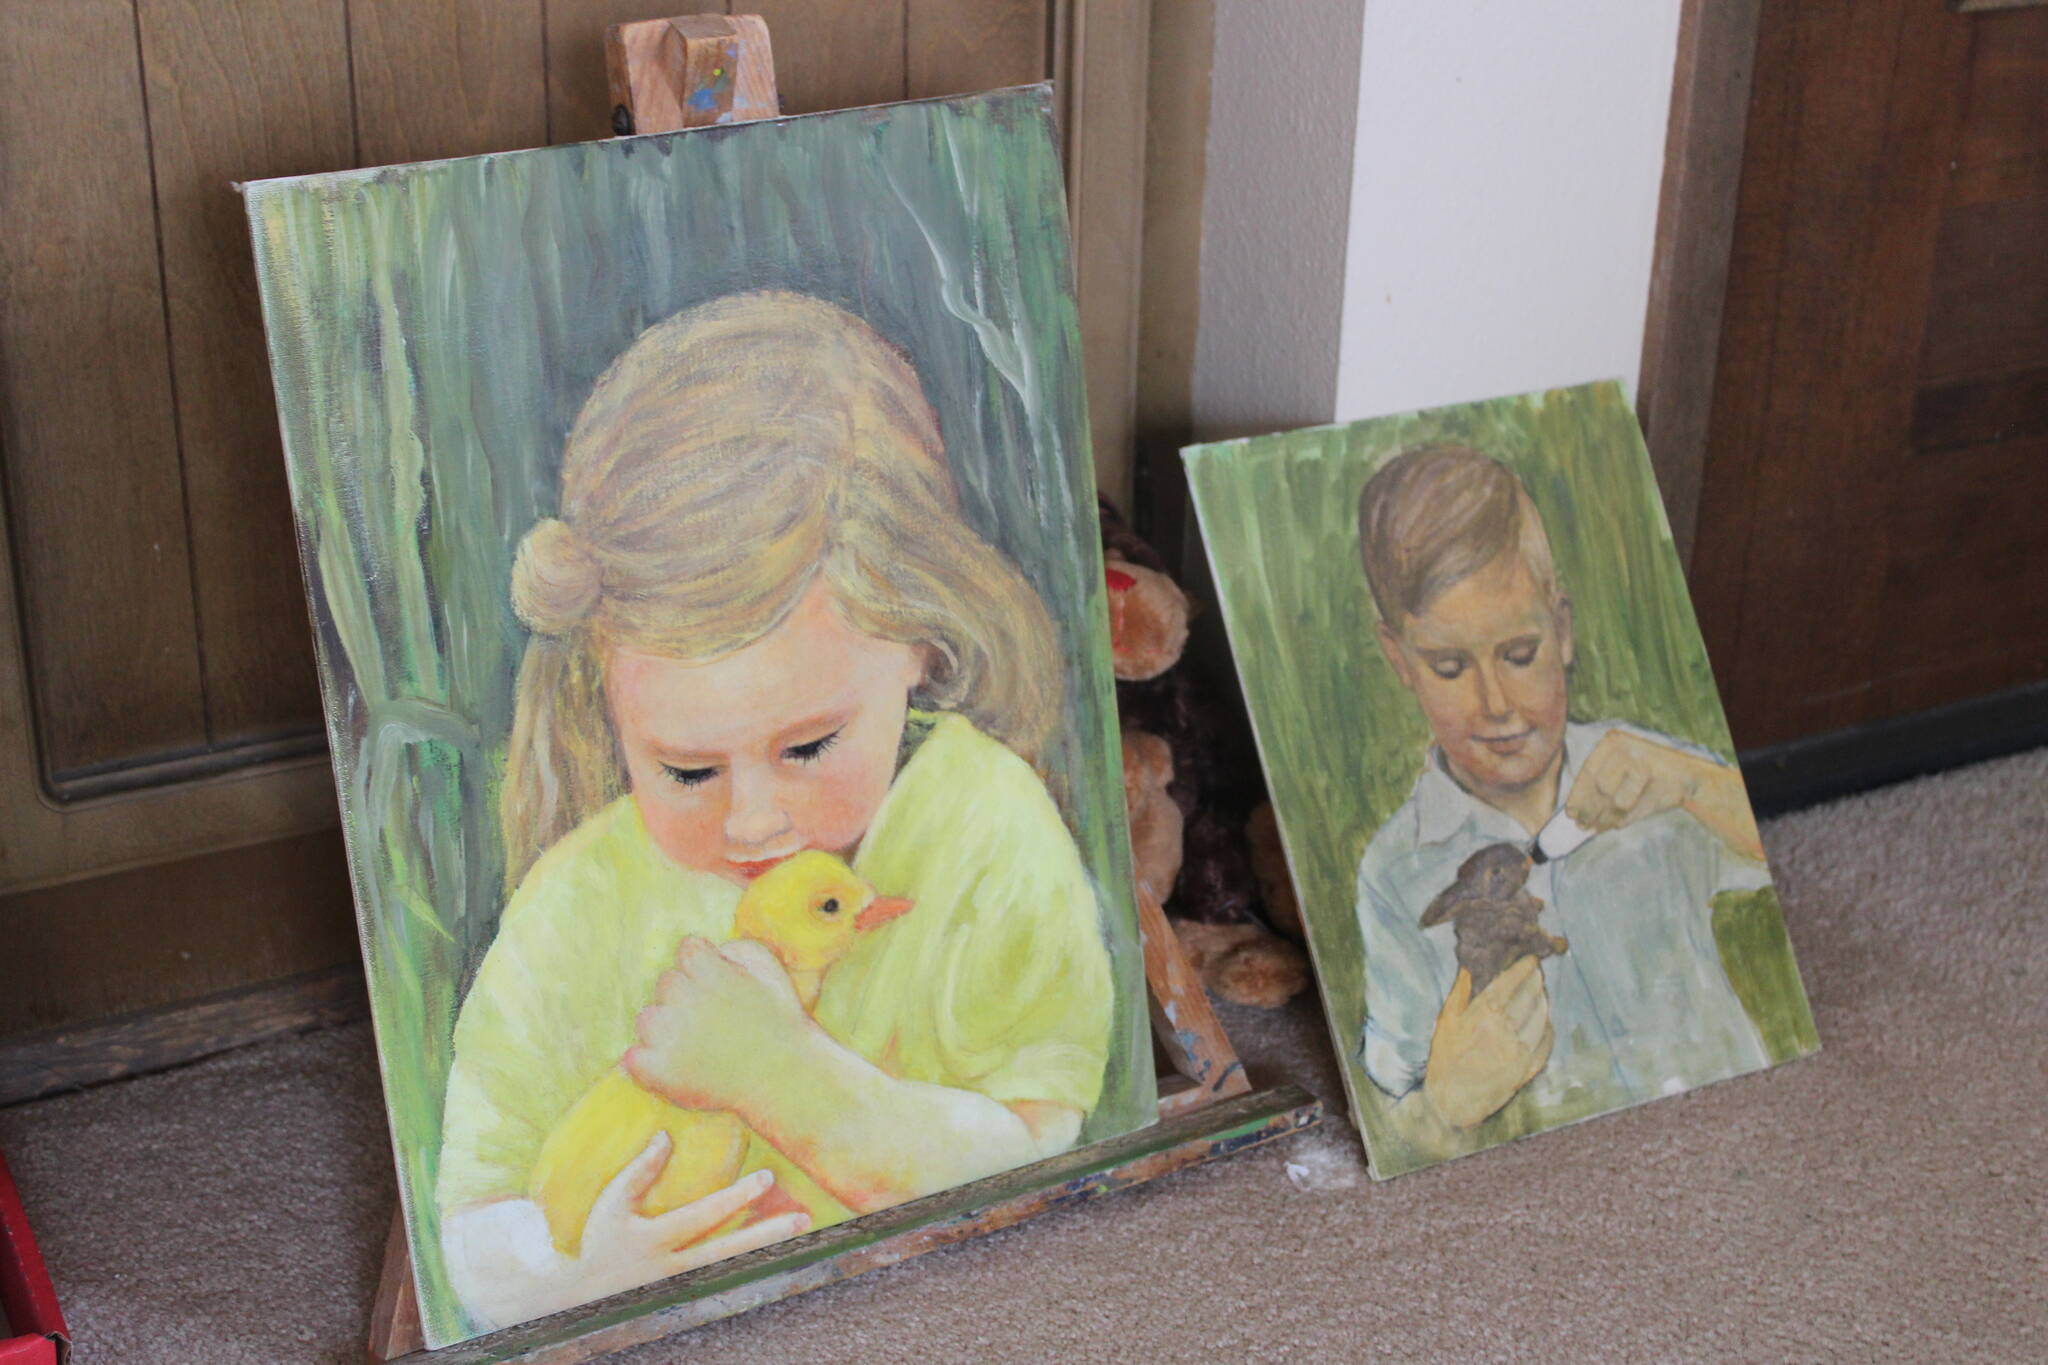 Along with sculpture, Irene Graham is a talented painter, whose late son Michael inspired the painting on the right, showing a young Michael feeding a small rabbit. Photo by Bailey Jo Josie/Sound Publishing